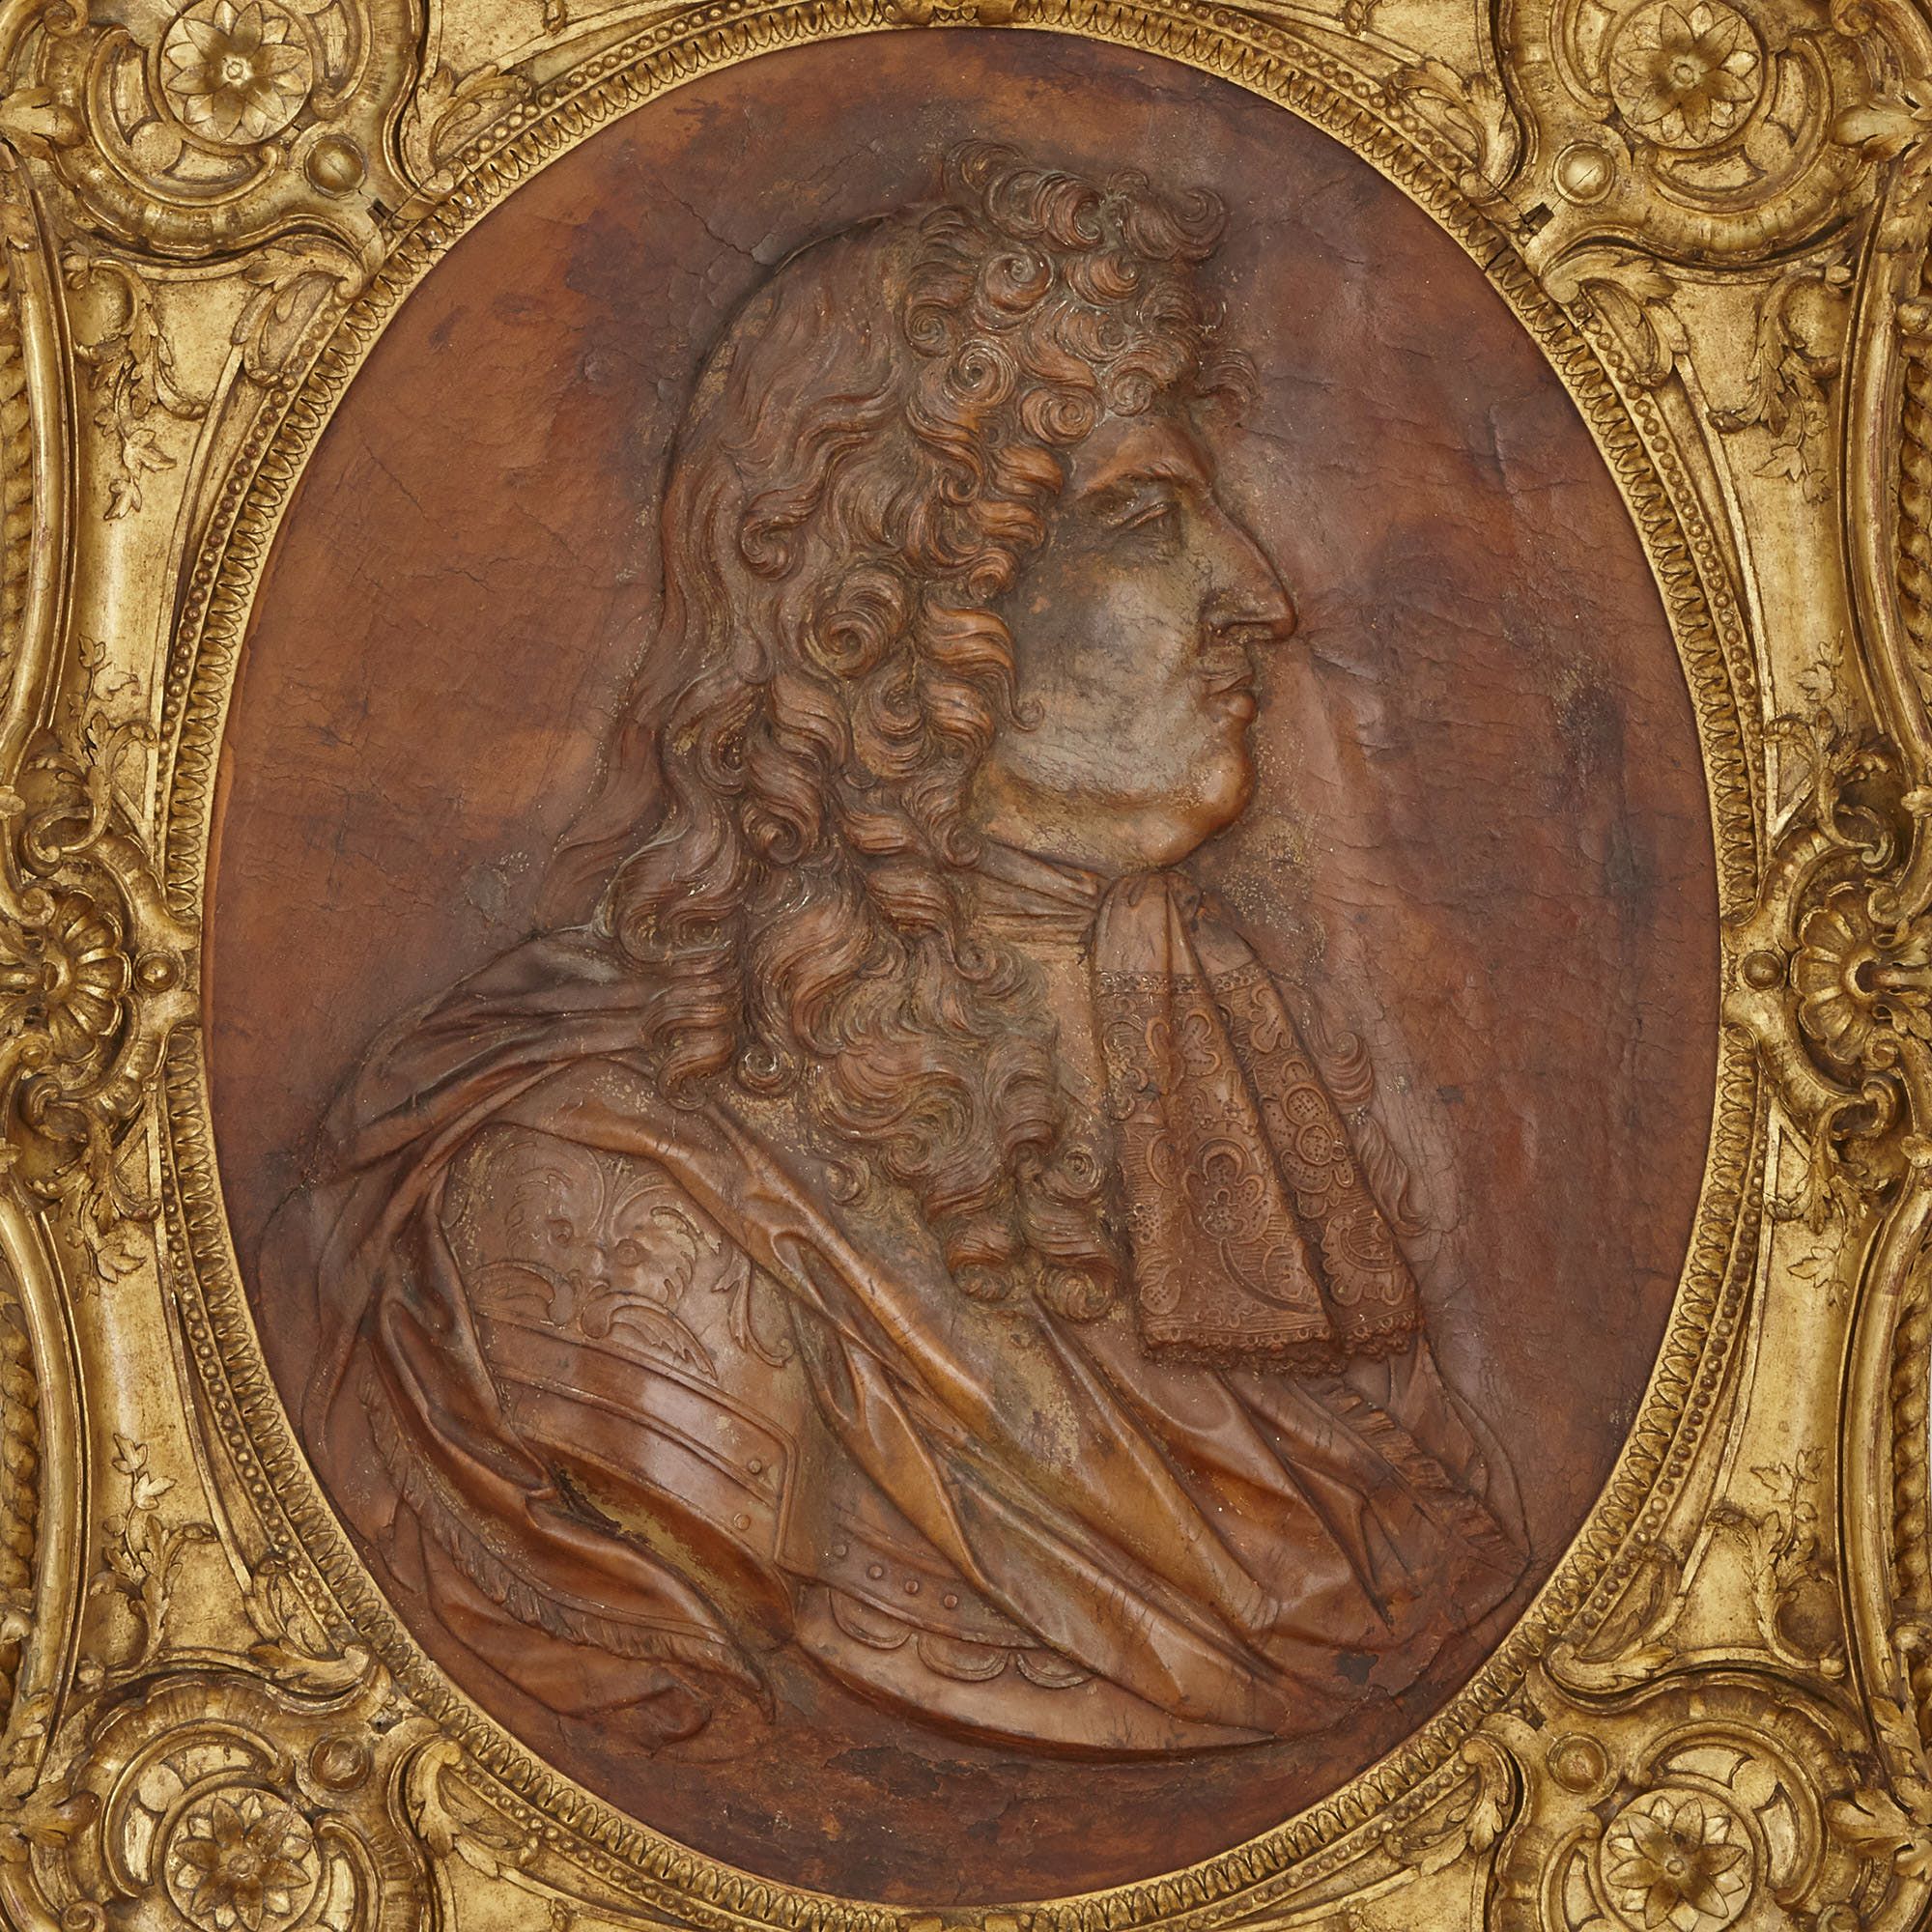 Plaque, Raised Relief, Louis XIV Sun Face, French, Giltwood, Antique, 19th  Century (Sold) – George Glazer Gallery, Antiques